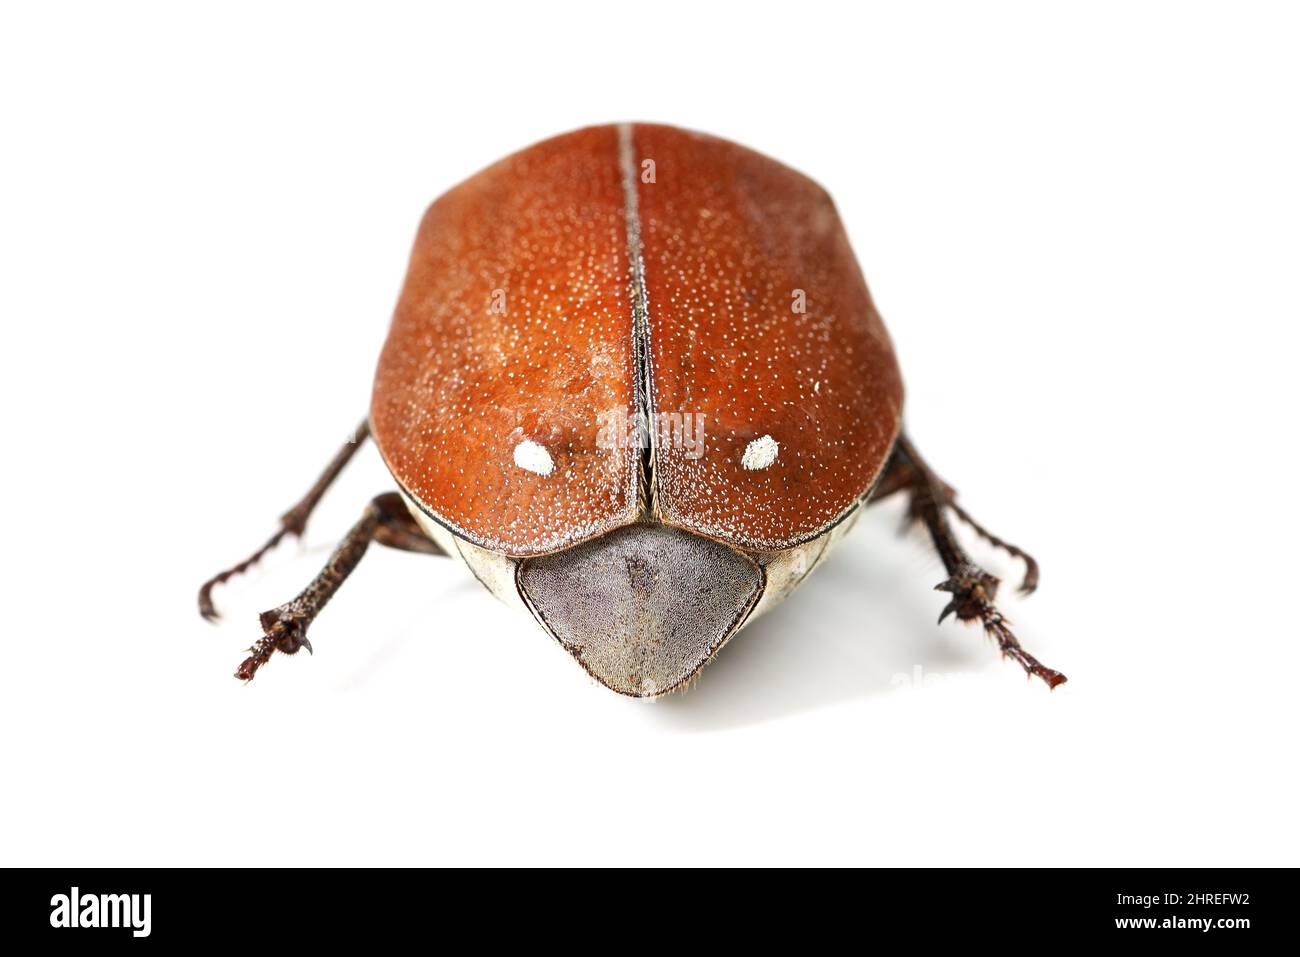 Check out the beautiful red excoskeleton. Macro shot of a red and brown beetle isolated on white. Stock Photo